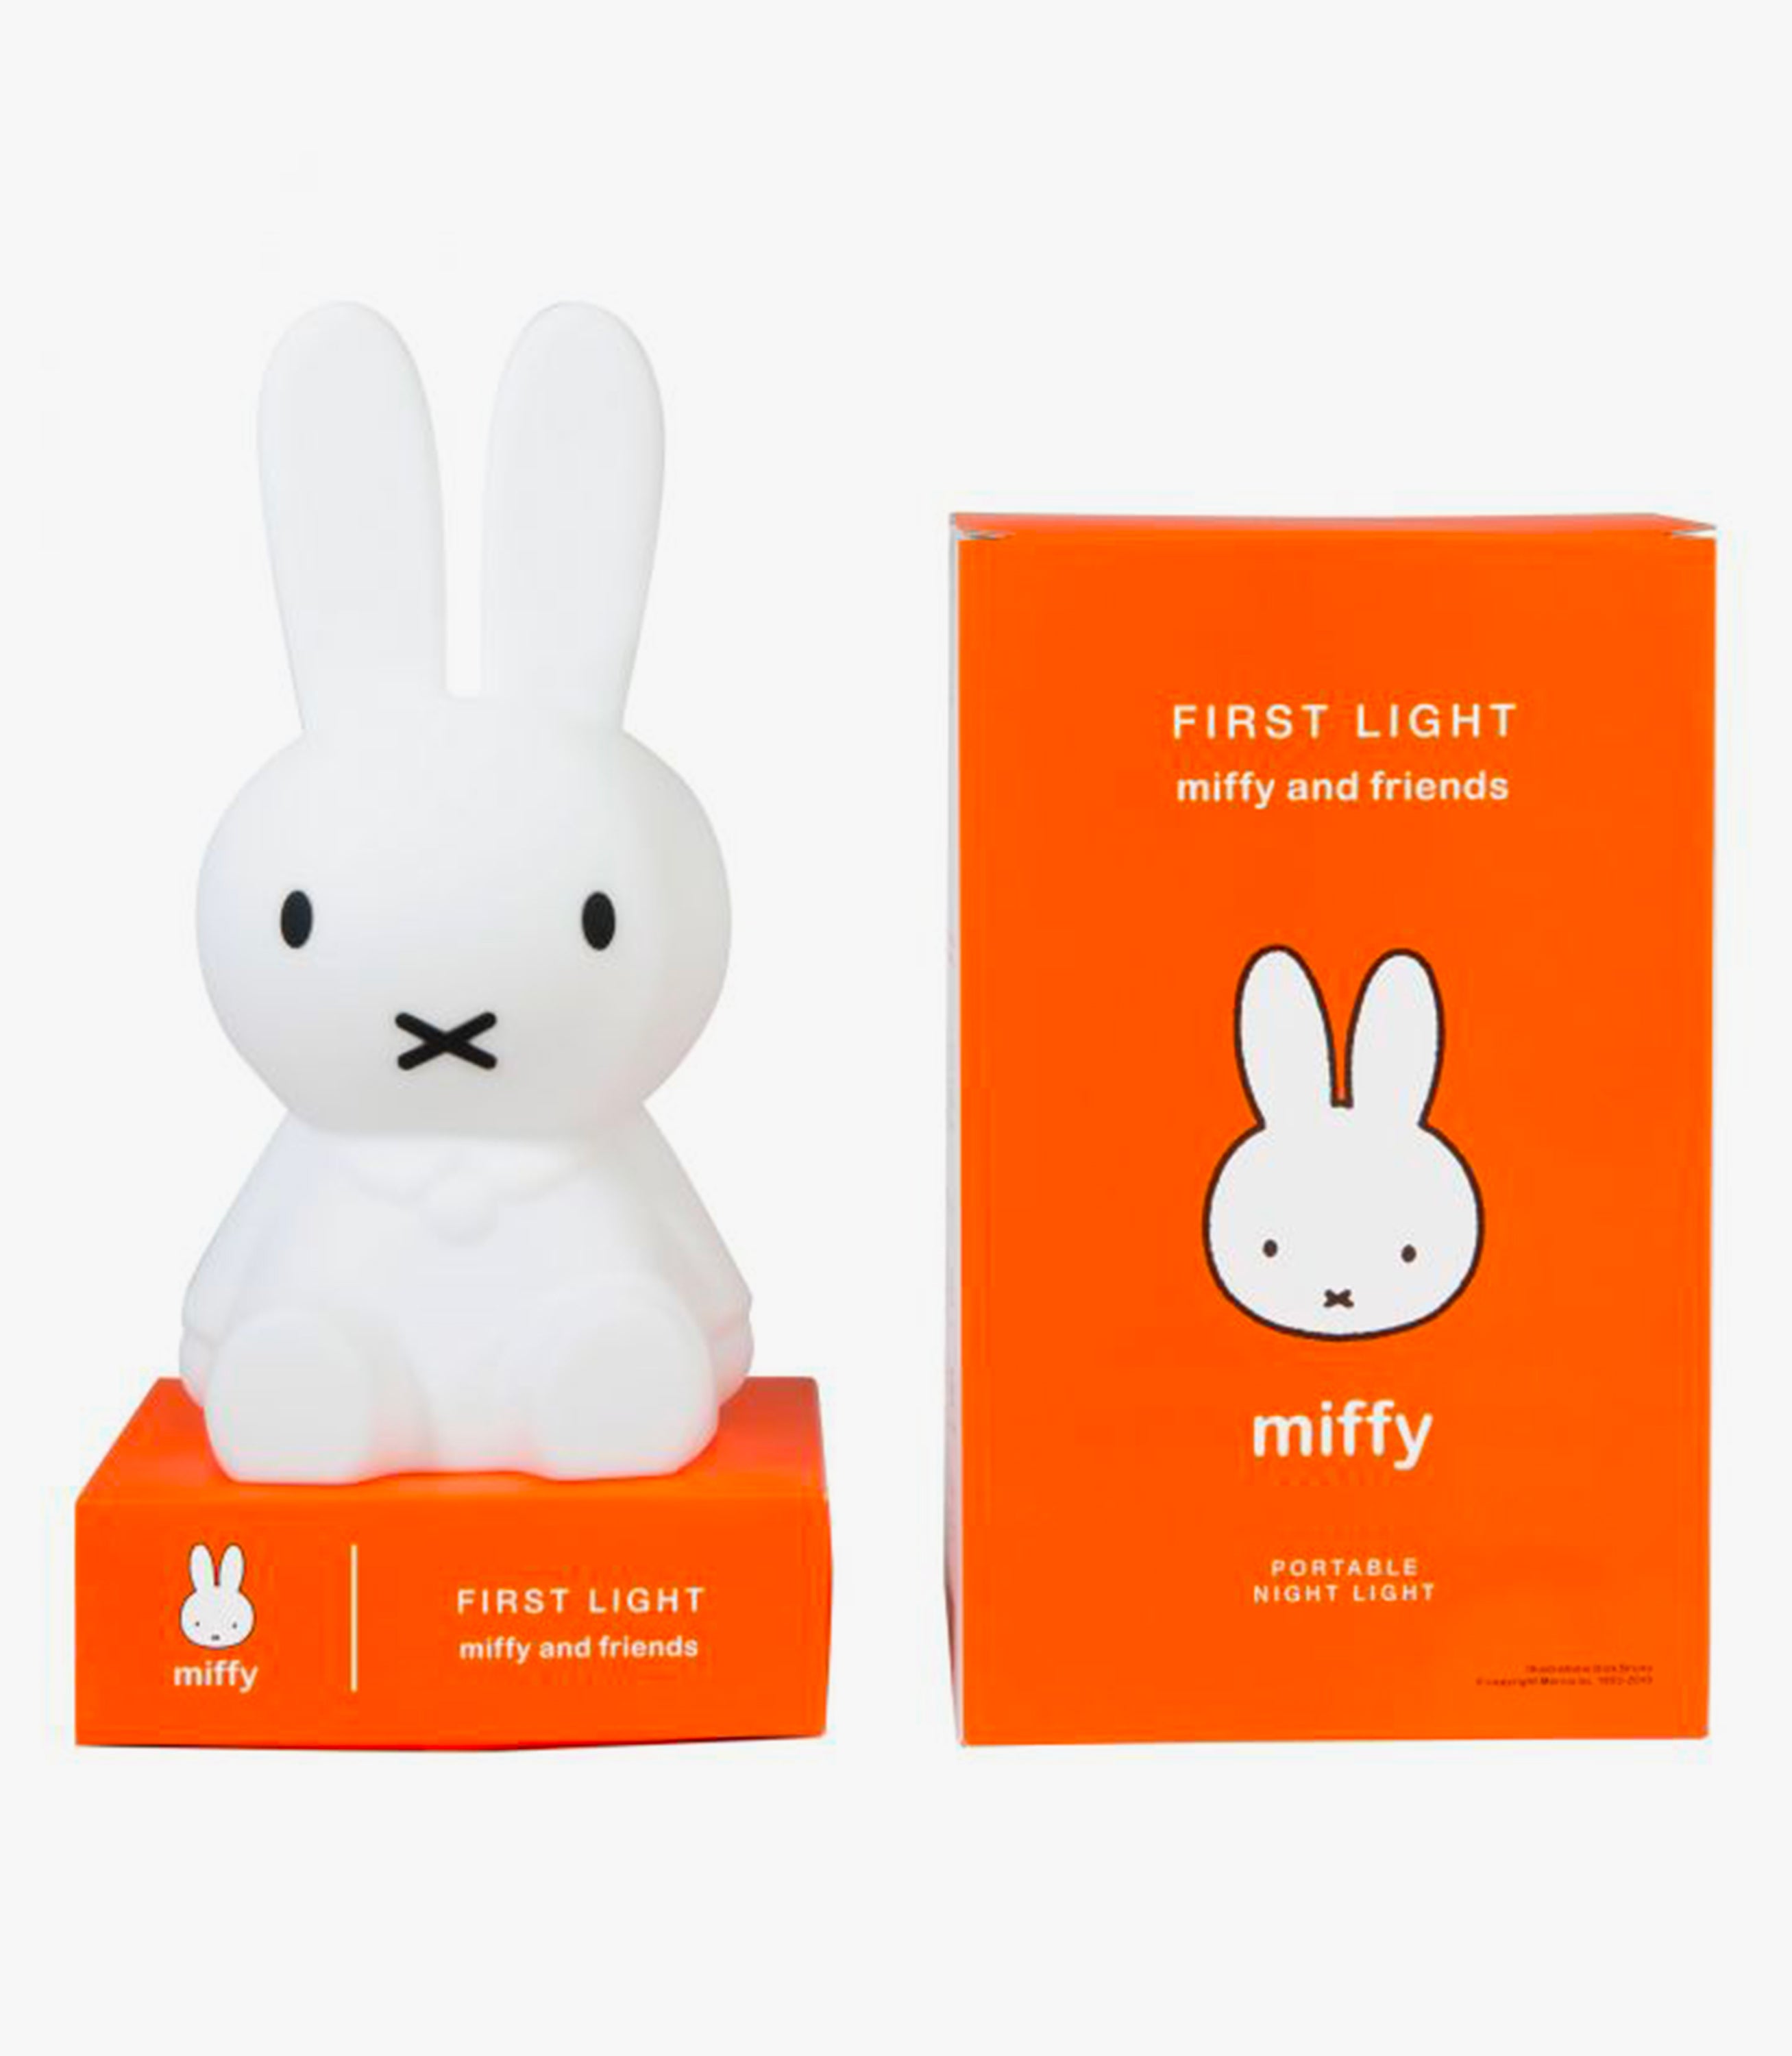 VEILLEUSE FIRST LIGHT RECHARGEABLE - MIFFY